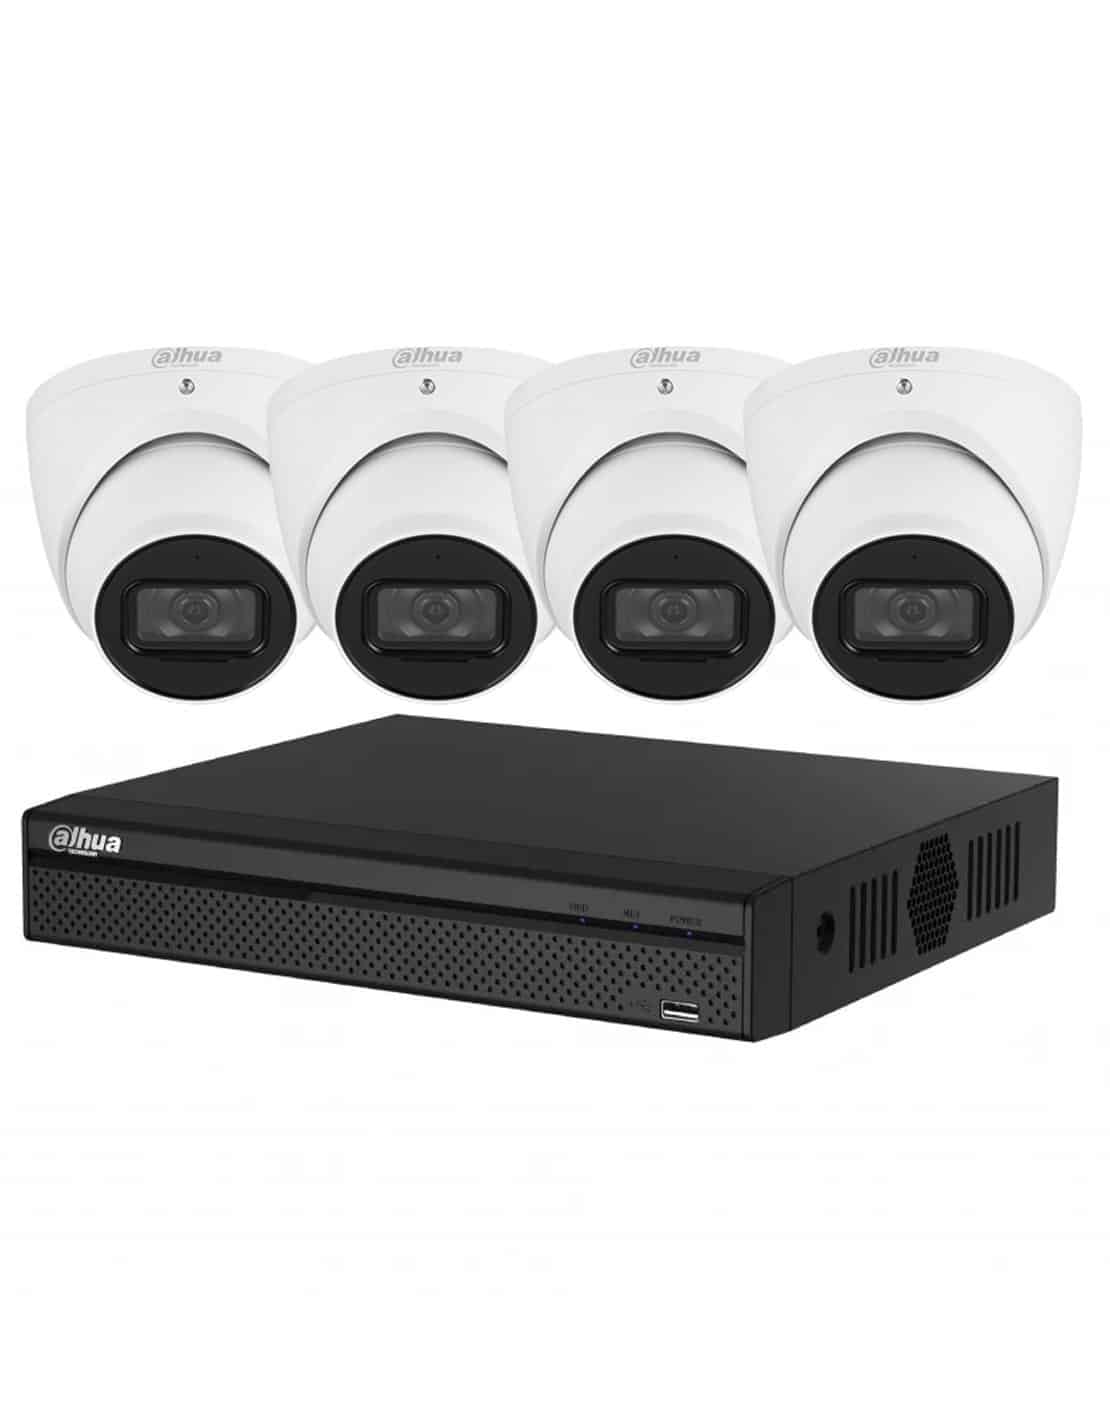 dahua 5mp fixed dome camera 4 channel nvr 1tb security surveillance kit nys k5044w